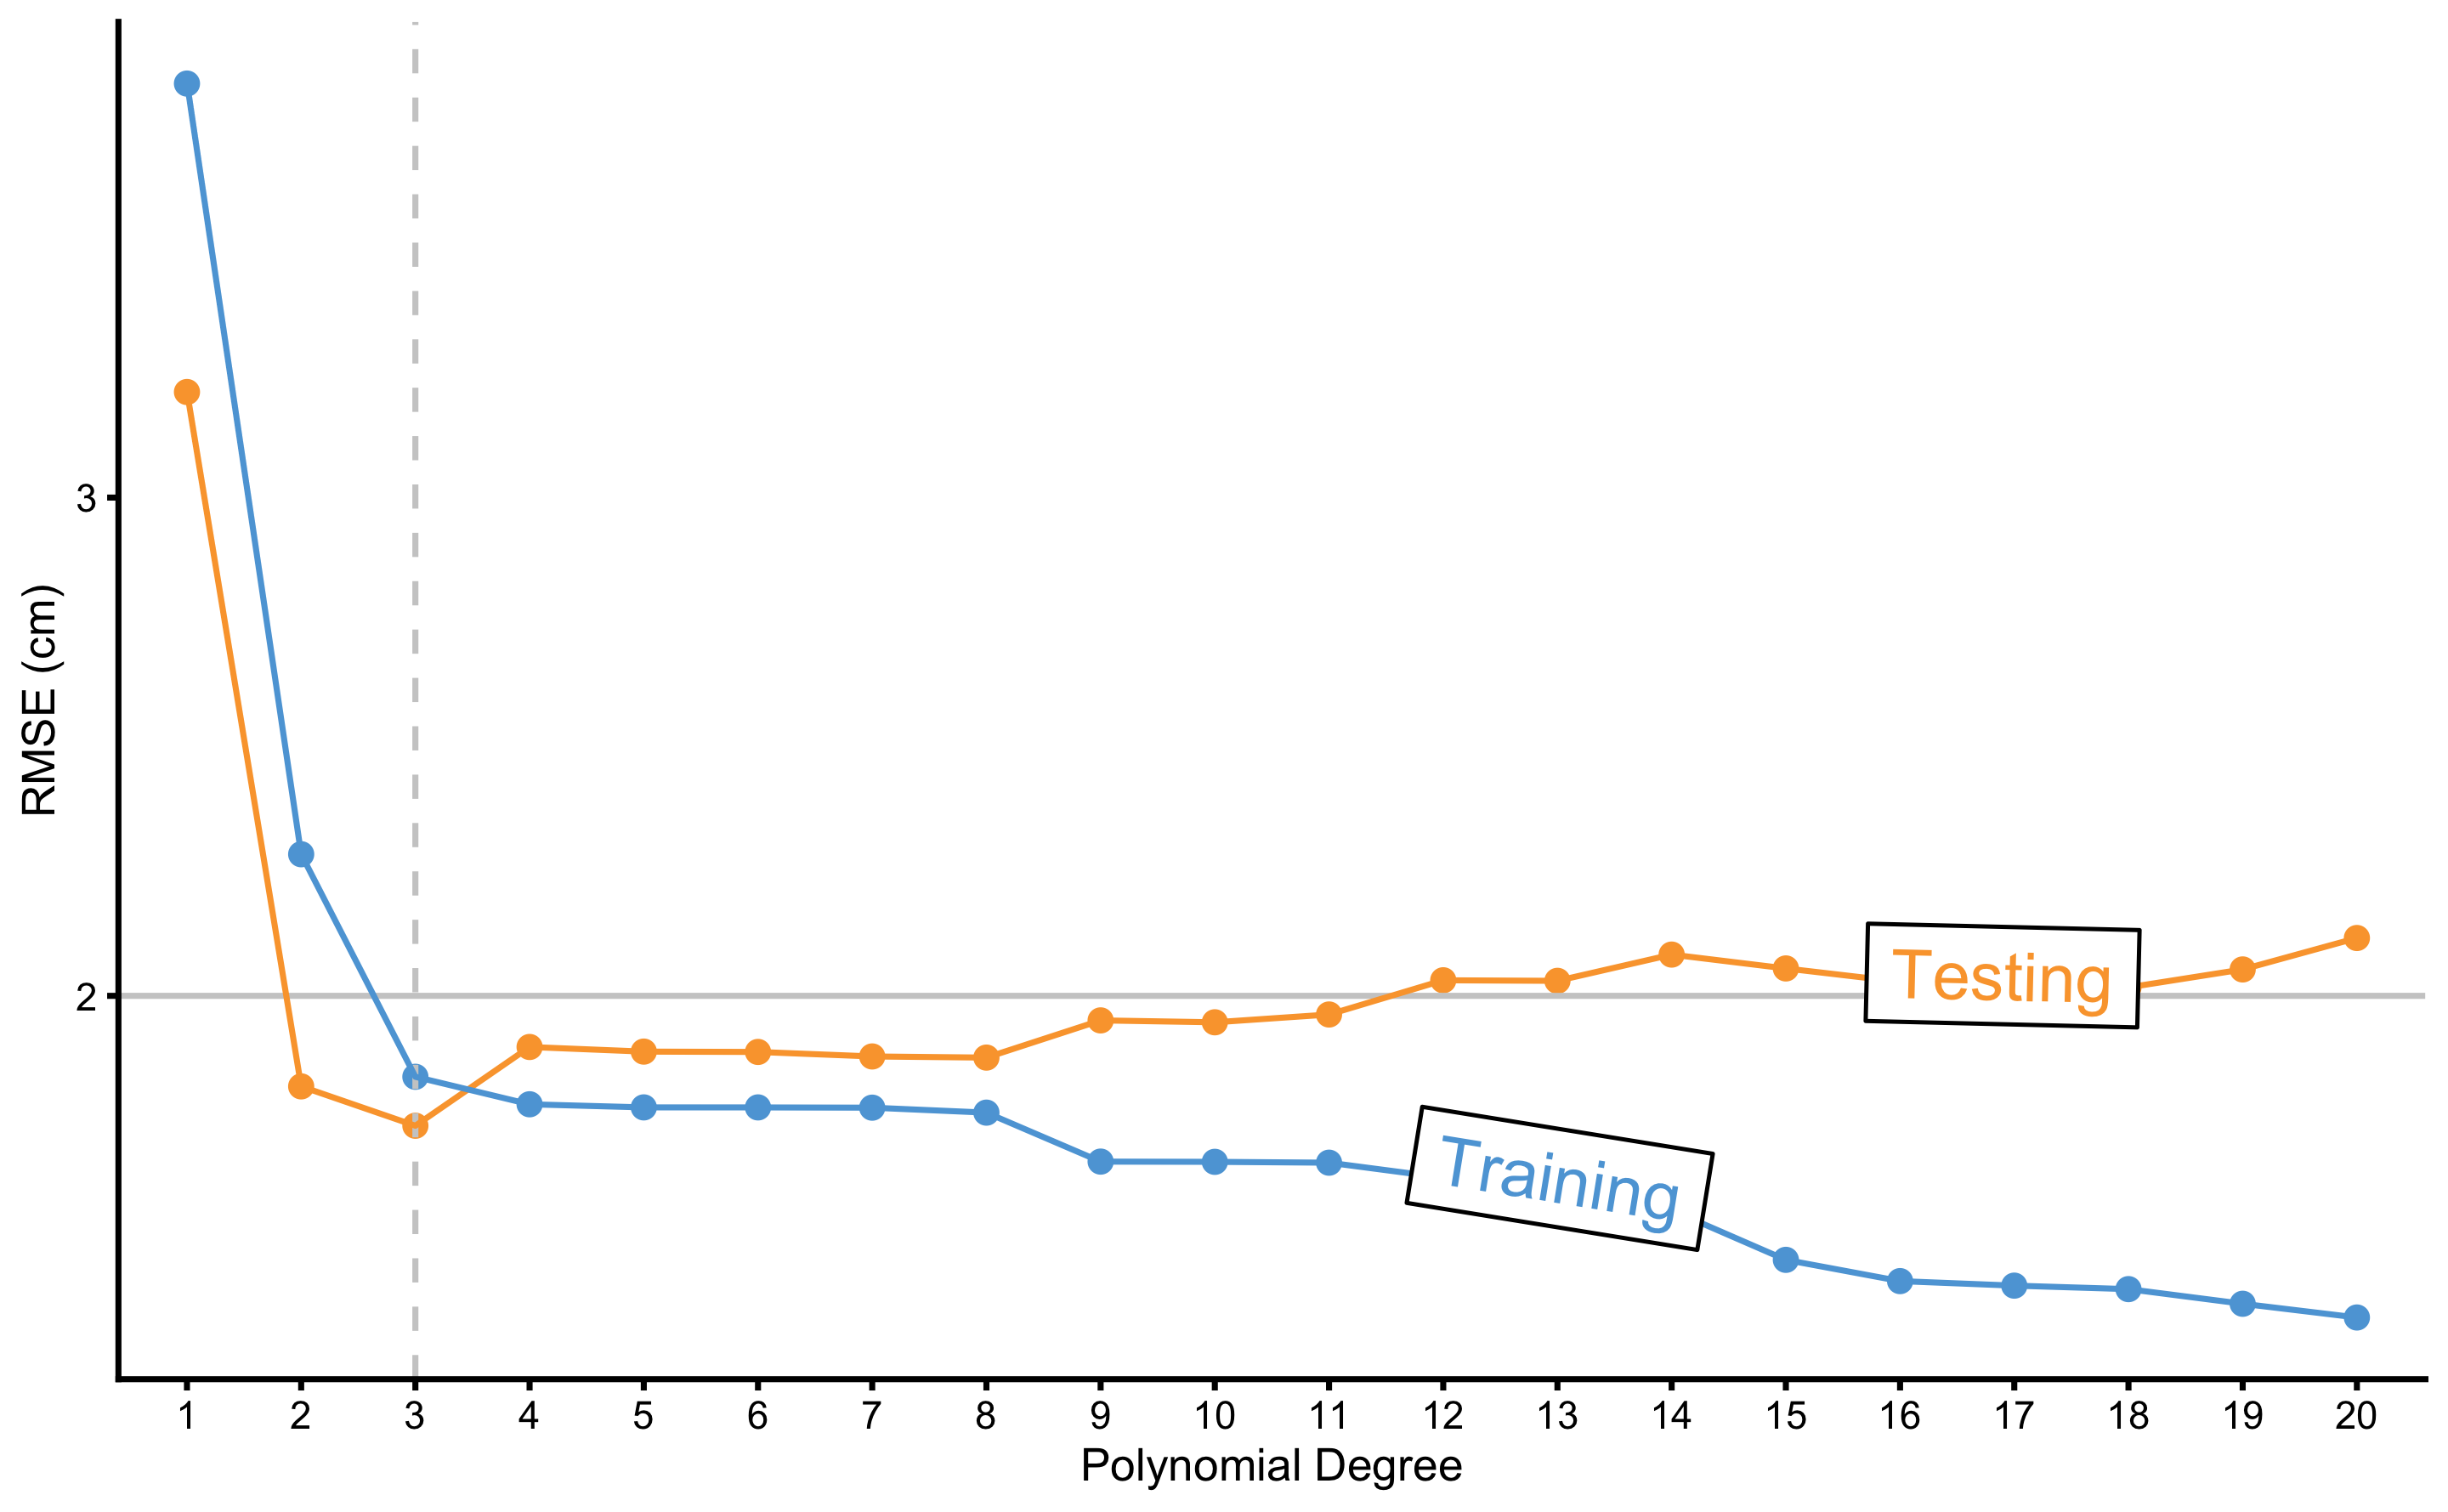 Testing and training errors across varying polynomial degrees. Model error is estimated with the RMSE metric, while polynomial degree represents tuning or flexibility parameter of the model. As can be noted from the figure, better training performance doesn’t imply better testing performance. Vertical dashed line represents the polynomial degree at which testing error is lowest. Polynomial degrees on the right of the vertical dashed line are said to overfit the data, while polynomial degree on the left are said to underfit the data